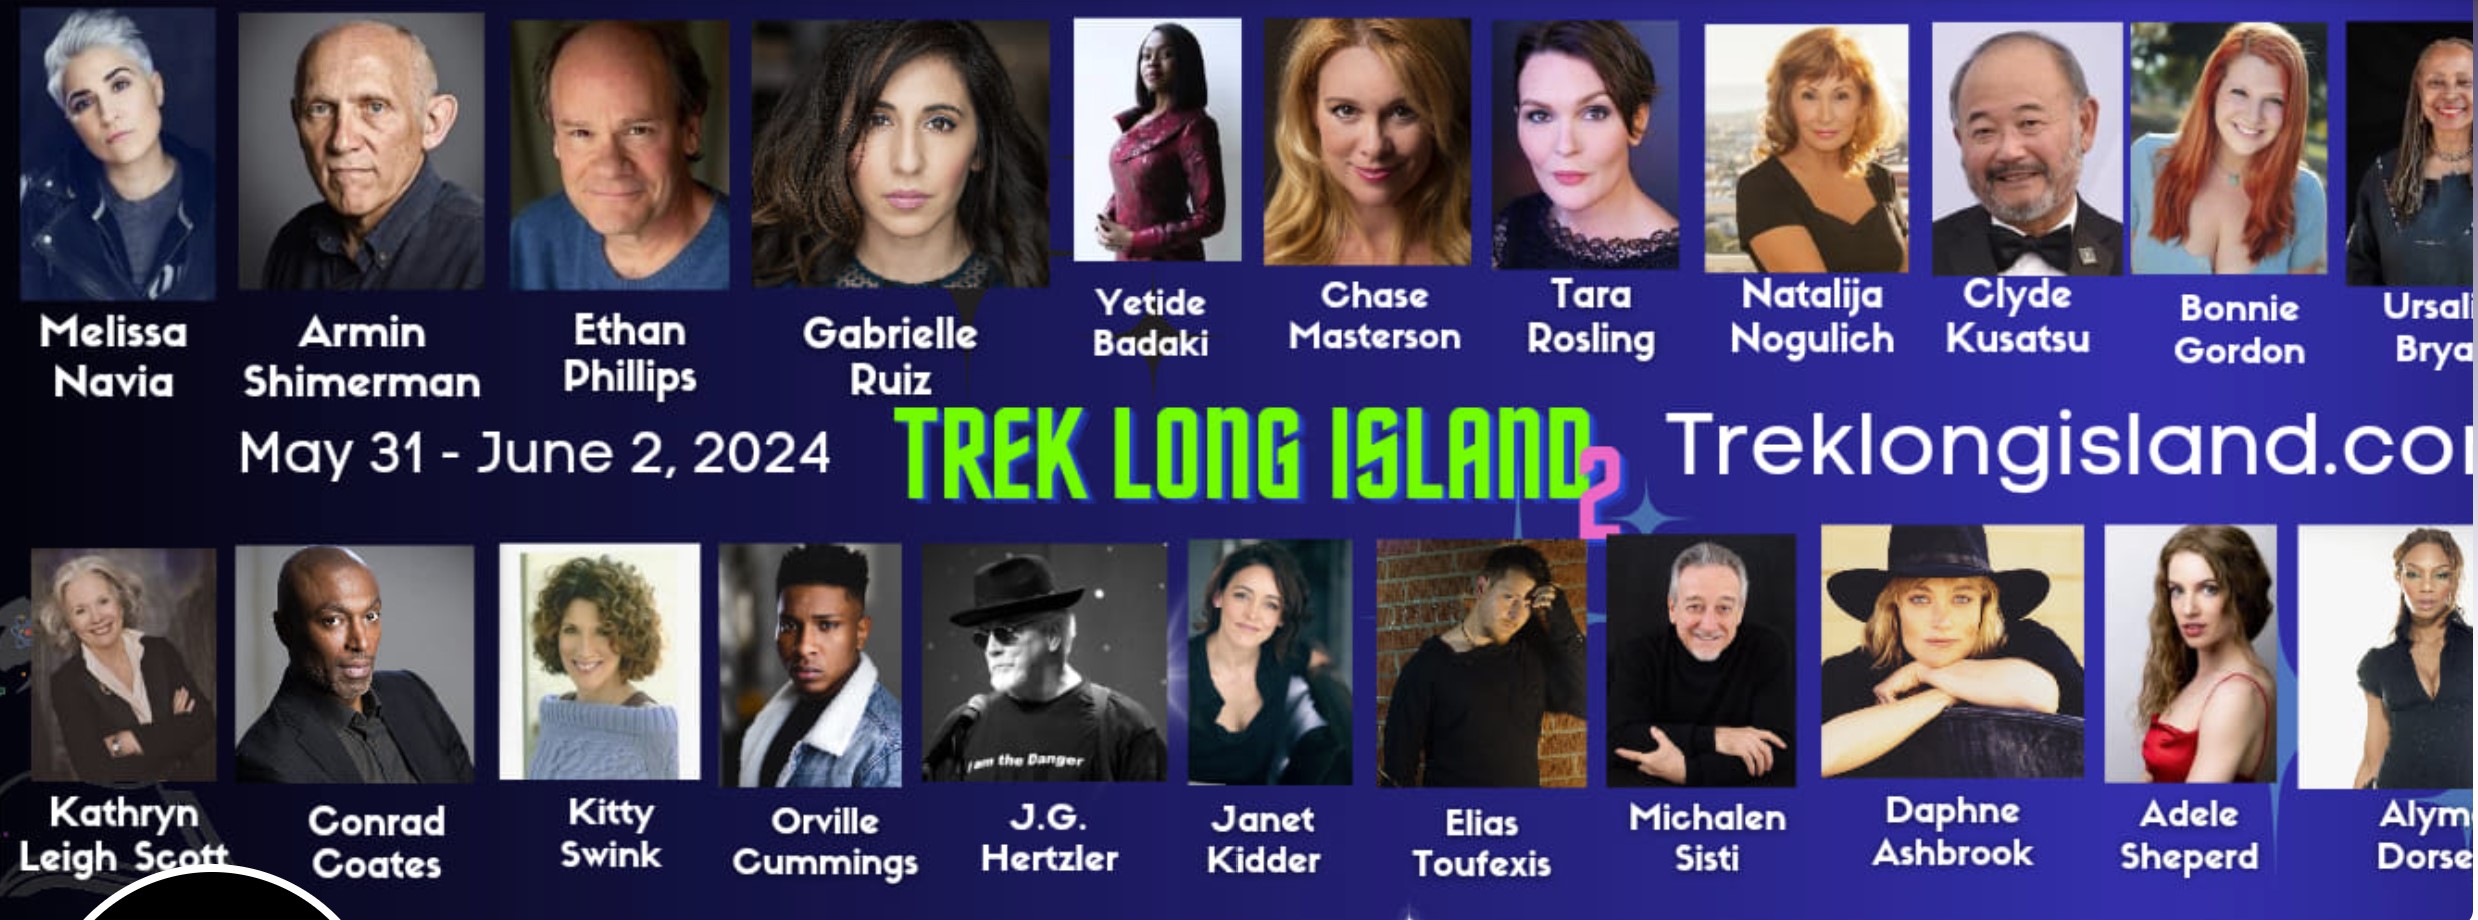 Have fun and make some new friends! Enjoy a Star Trek Convention.